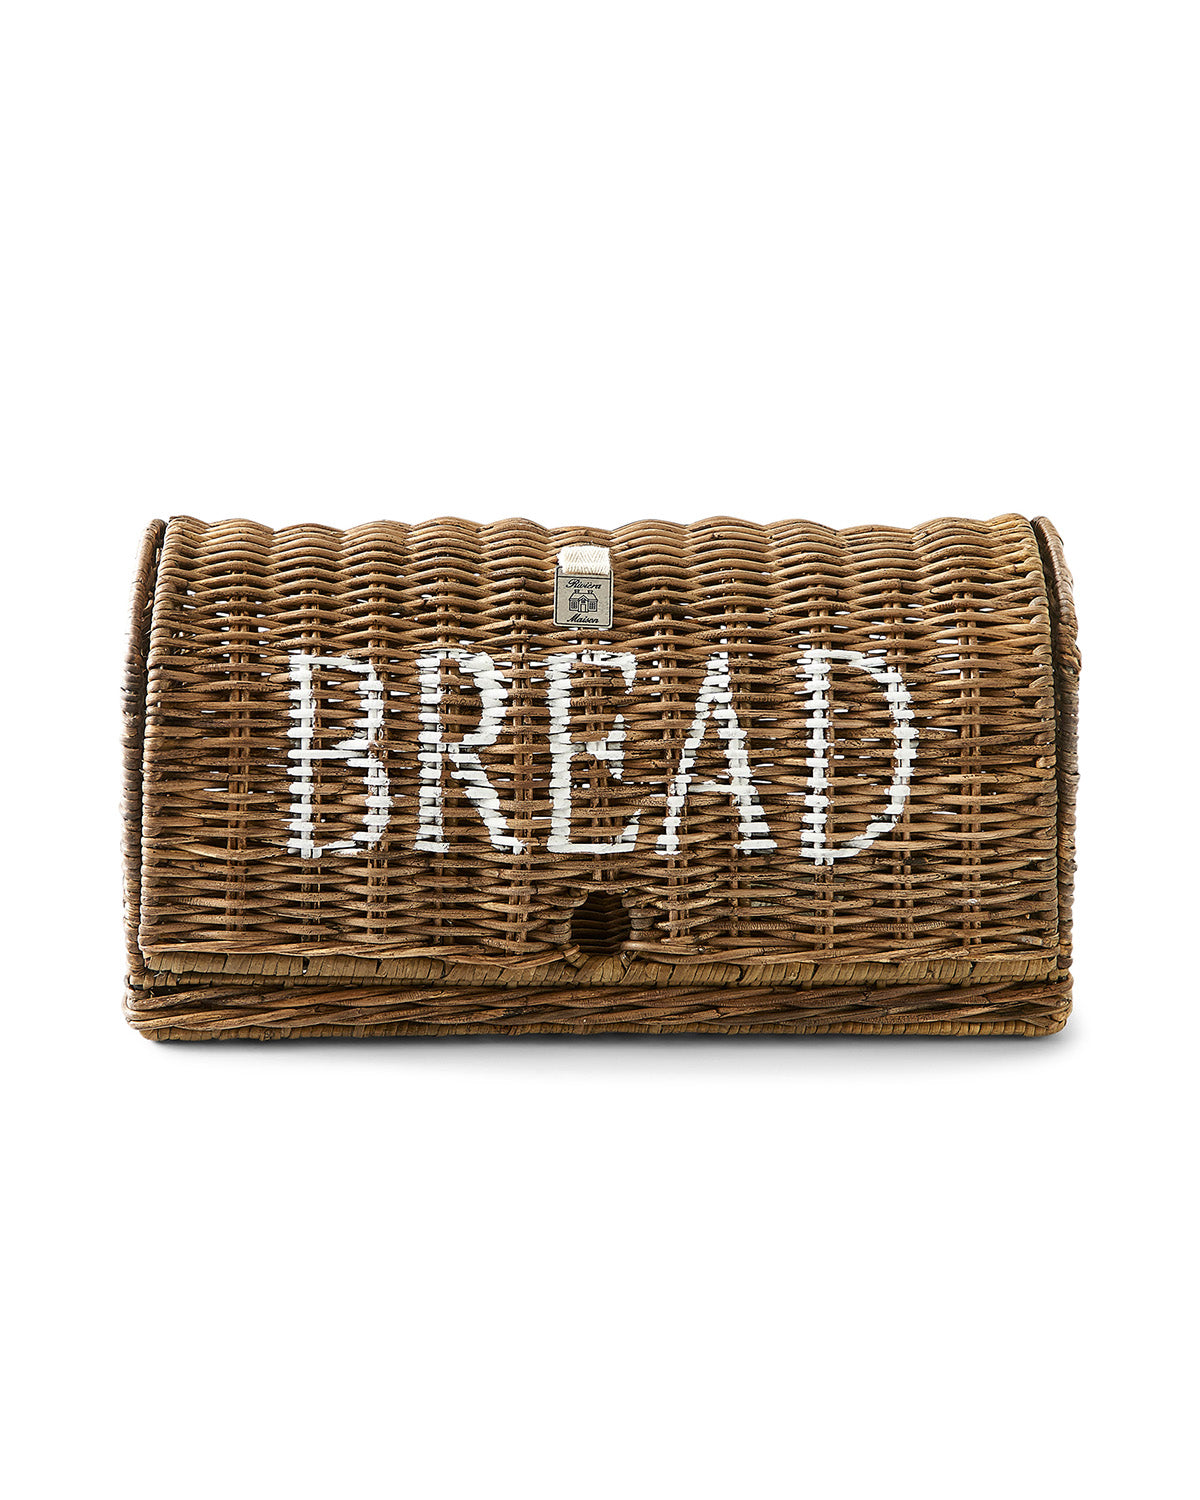 BREAD BOX made of Rustic Rattan labeled in white color by Riviera Maison